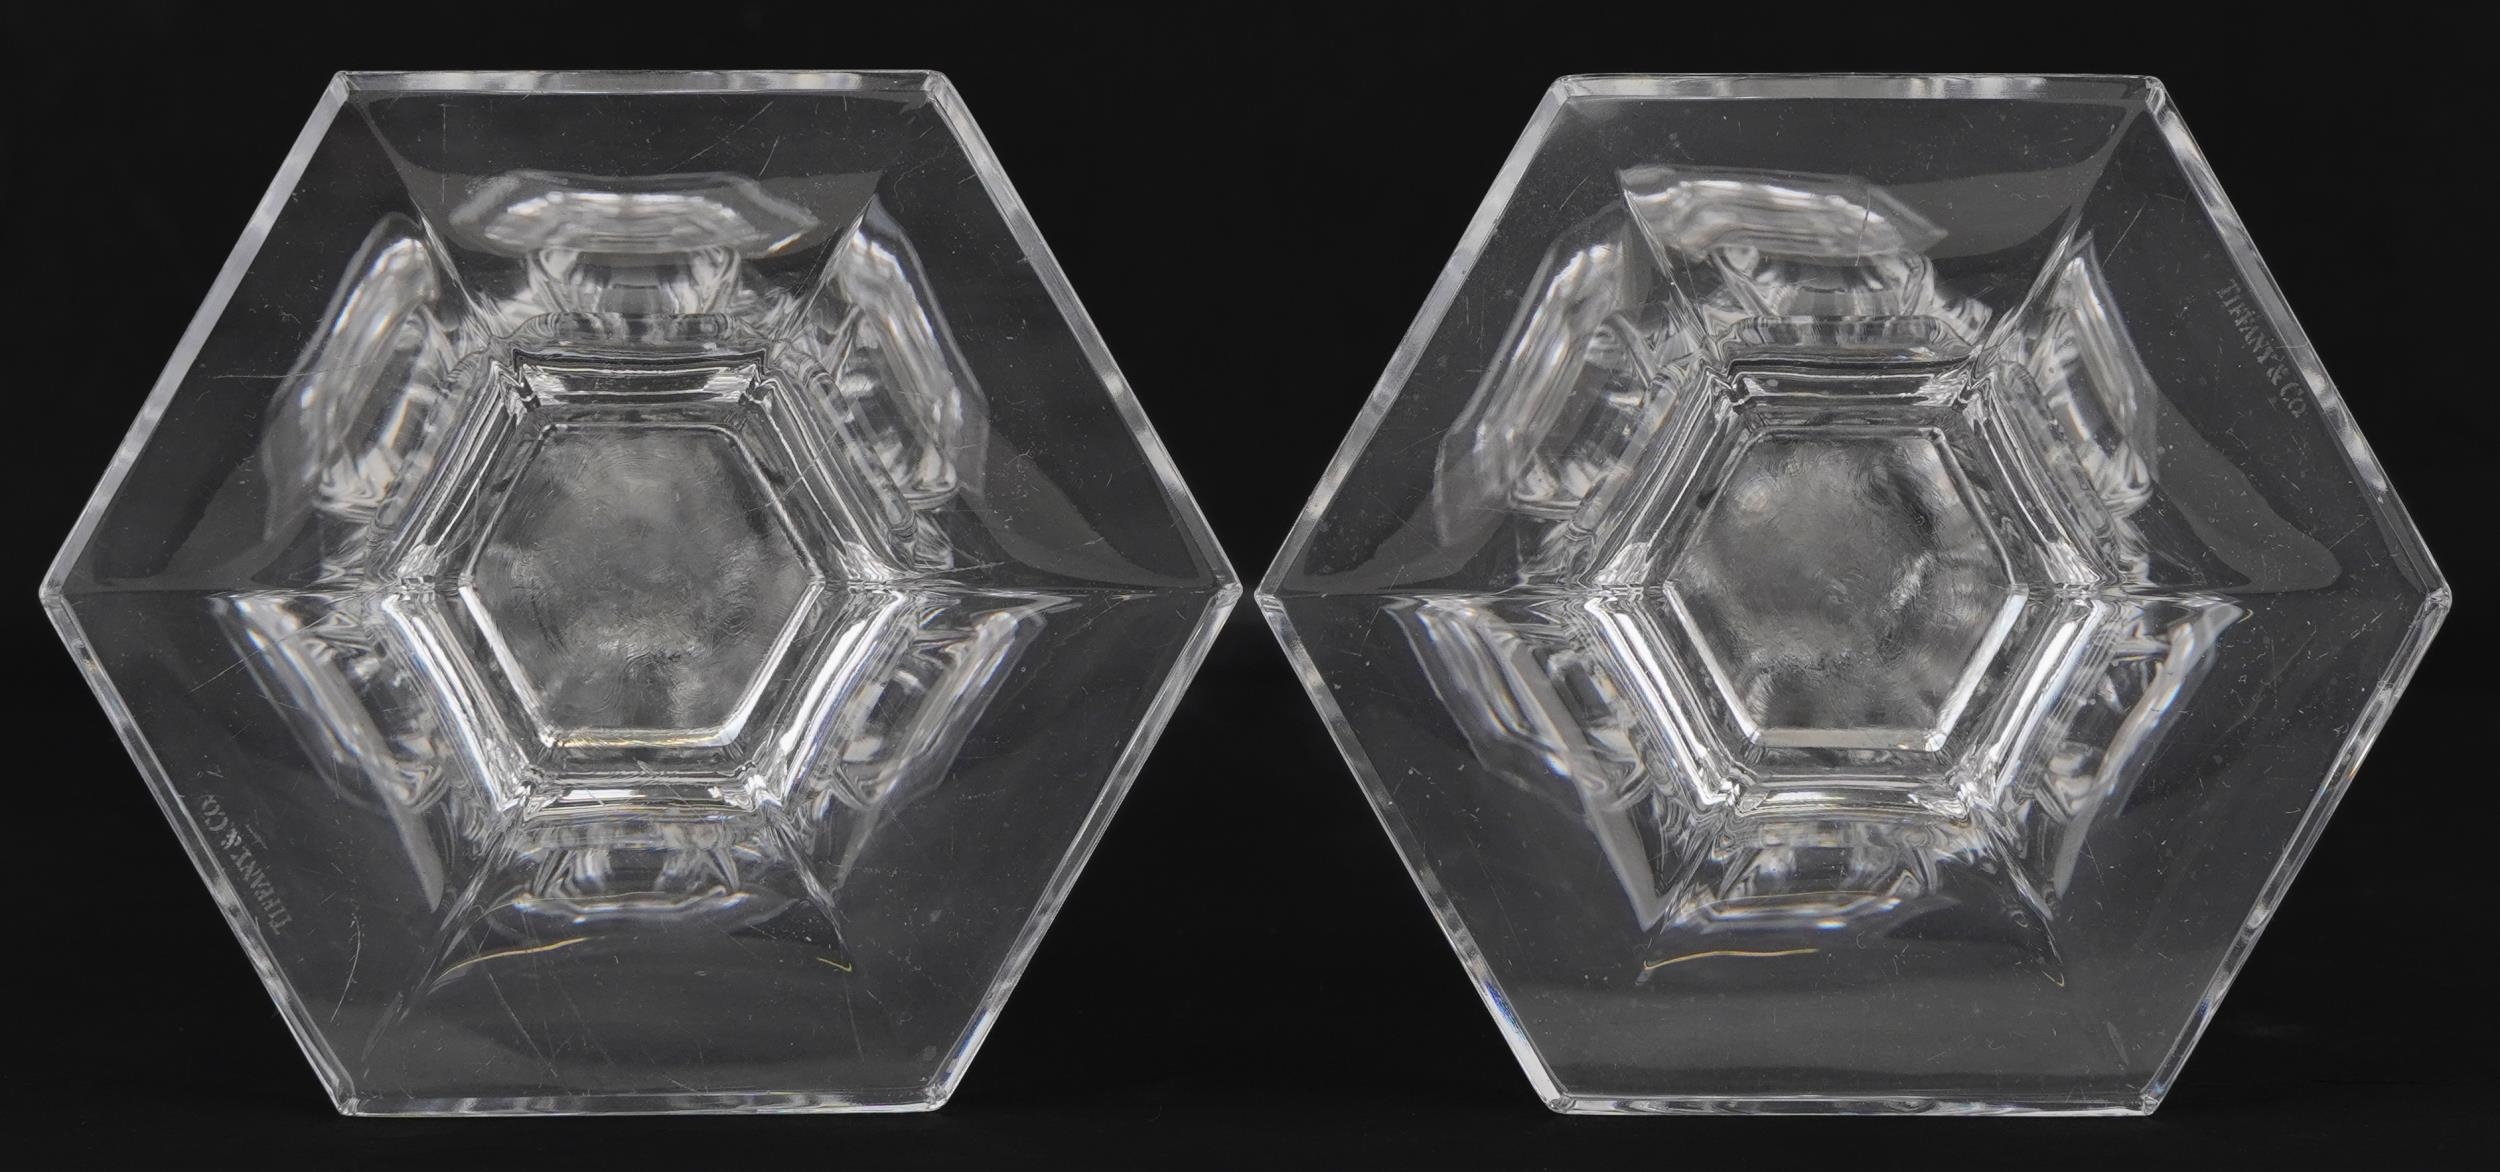 Pair of Tiffany & Co hexagonal glass candlesticks, each 24cm high - Image 3 of 4